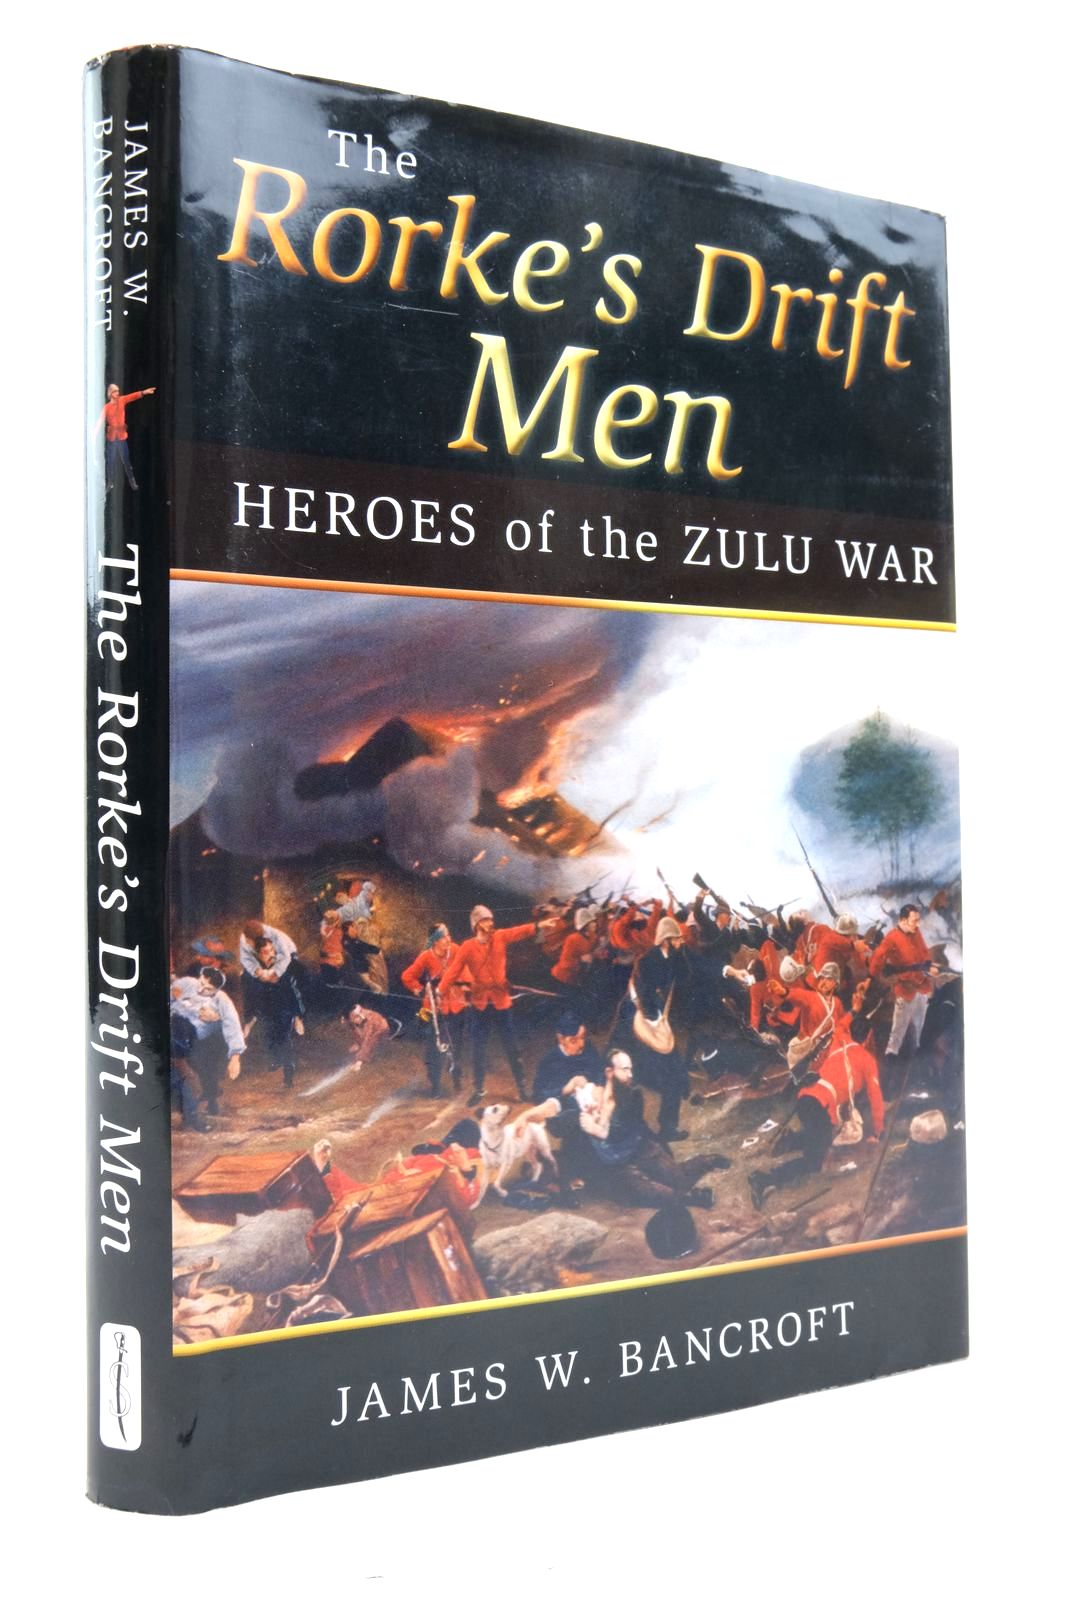 Photo of THE RORKE'S DRIFT MEN written by Bancroft, James W. published by Spellmount Ltd. (STOCK CODE: 2138130)  for sale by Stella & Rose's Books